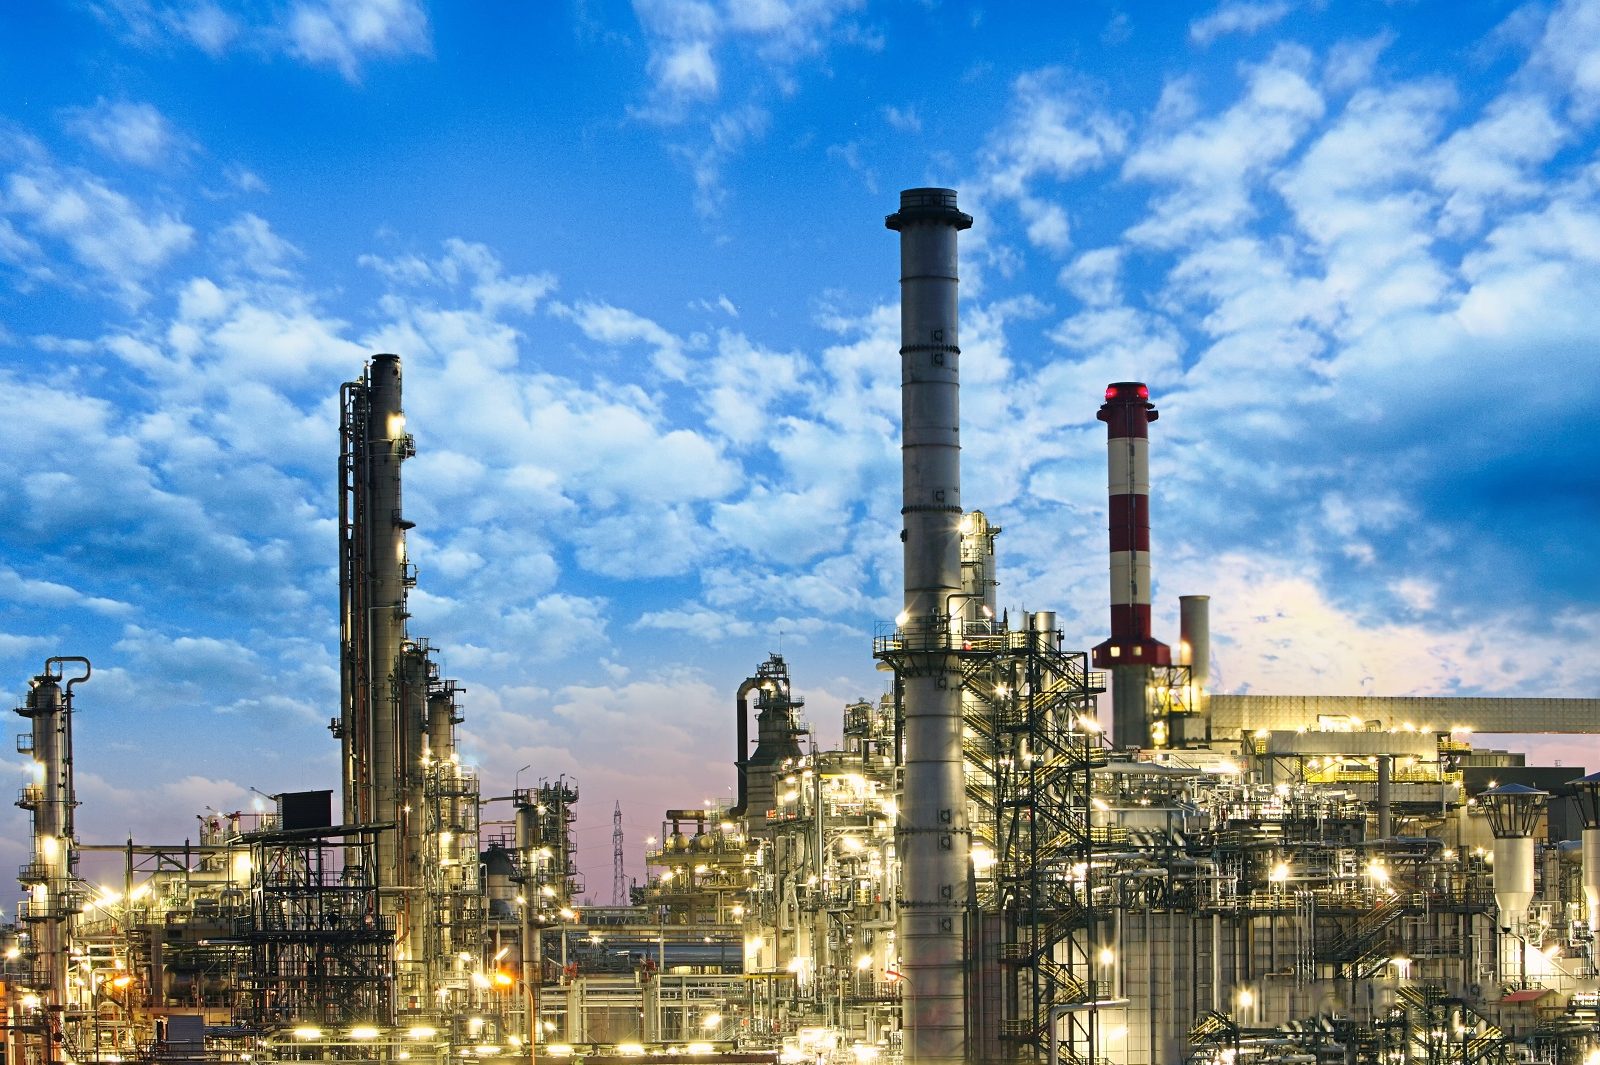 Oil And Gas Industry - Refinery, Factory, Petrochemical Plant